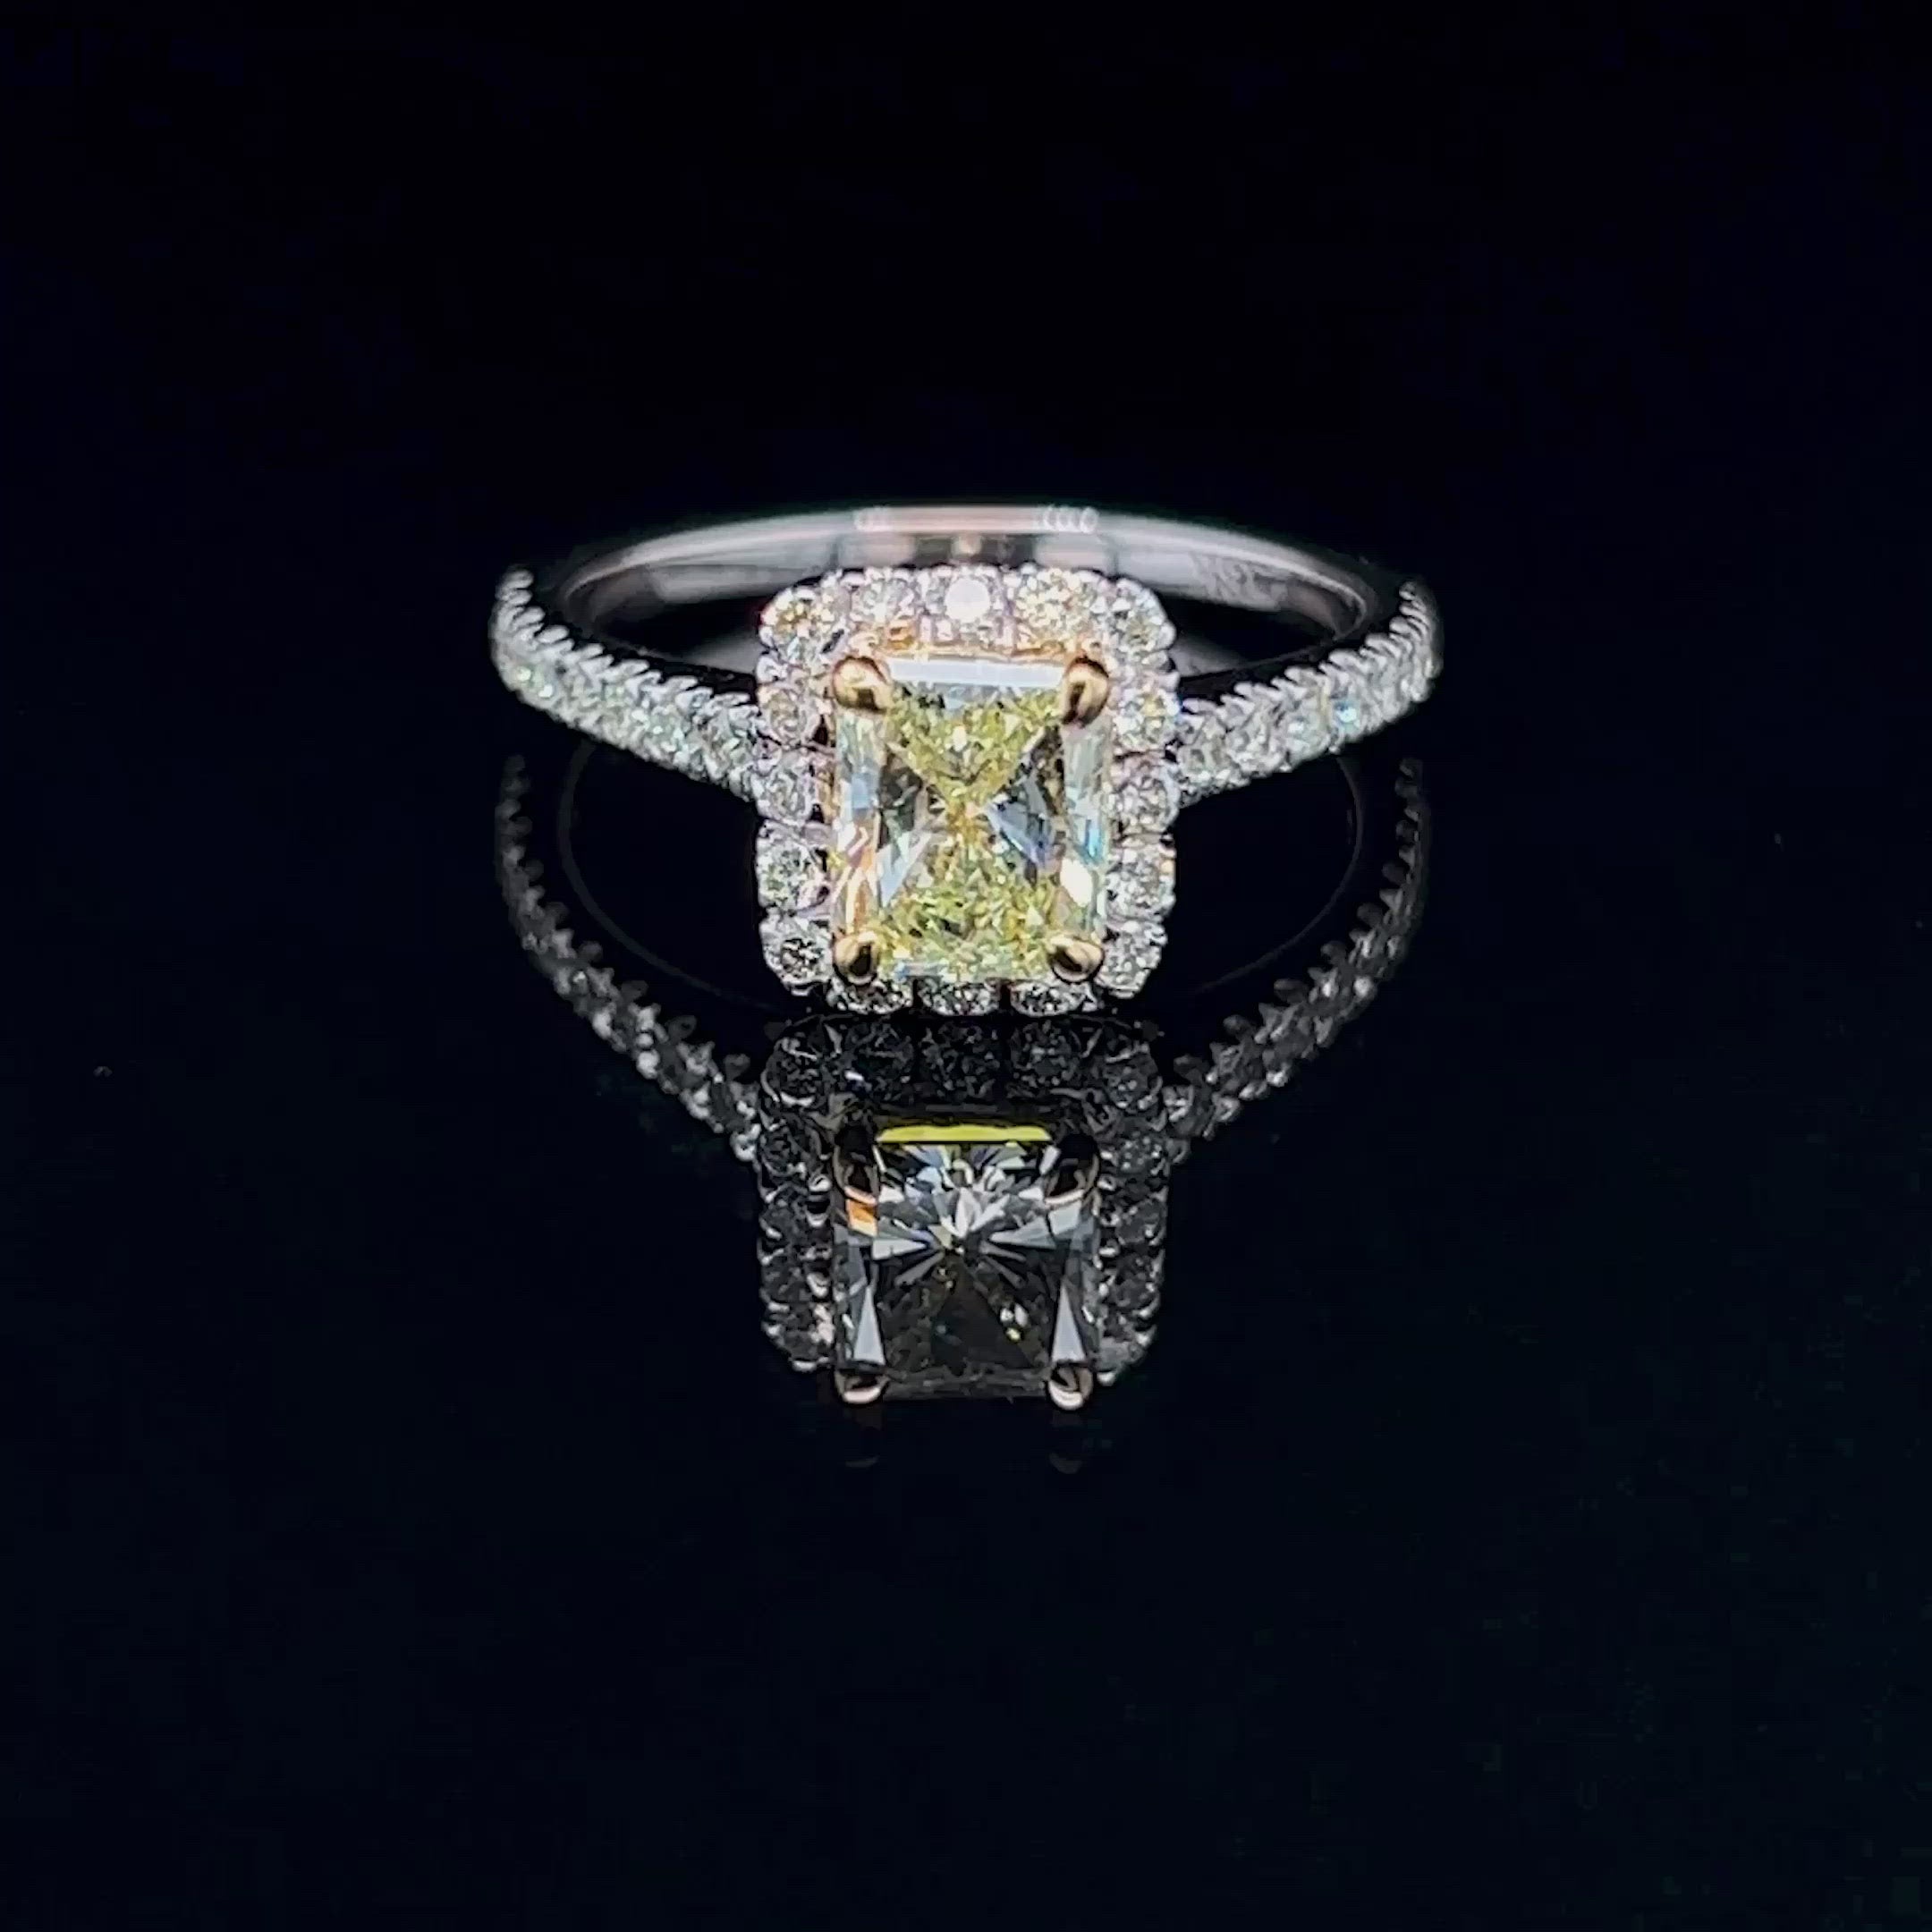 Classy 1.62CT Radiant and Round Cut Diamond Engagement Ring in 18KT Two Tone Gold